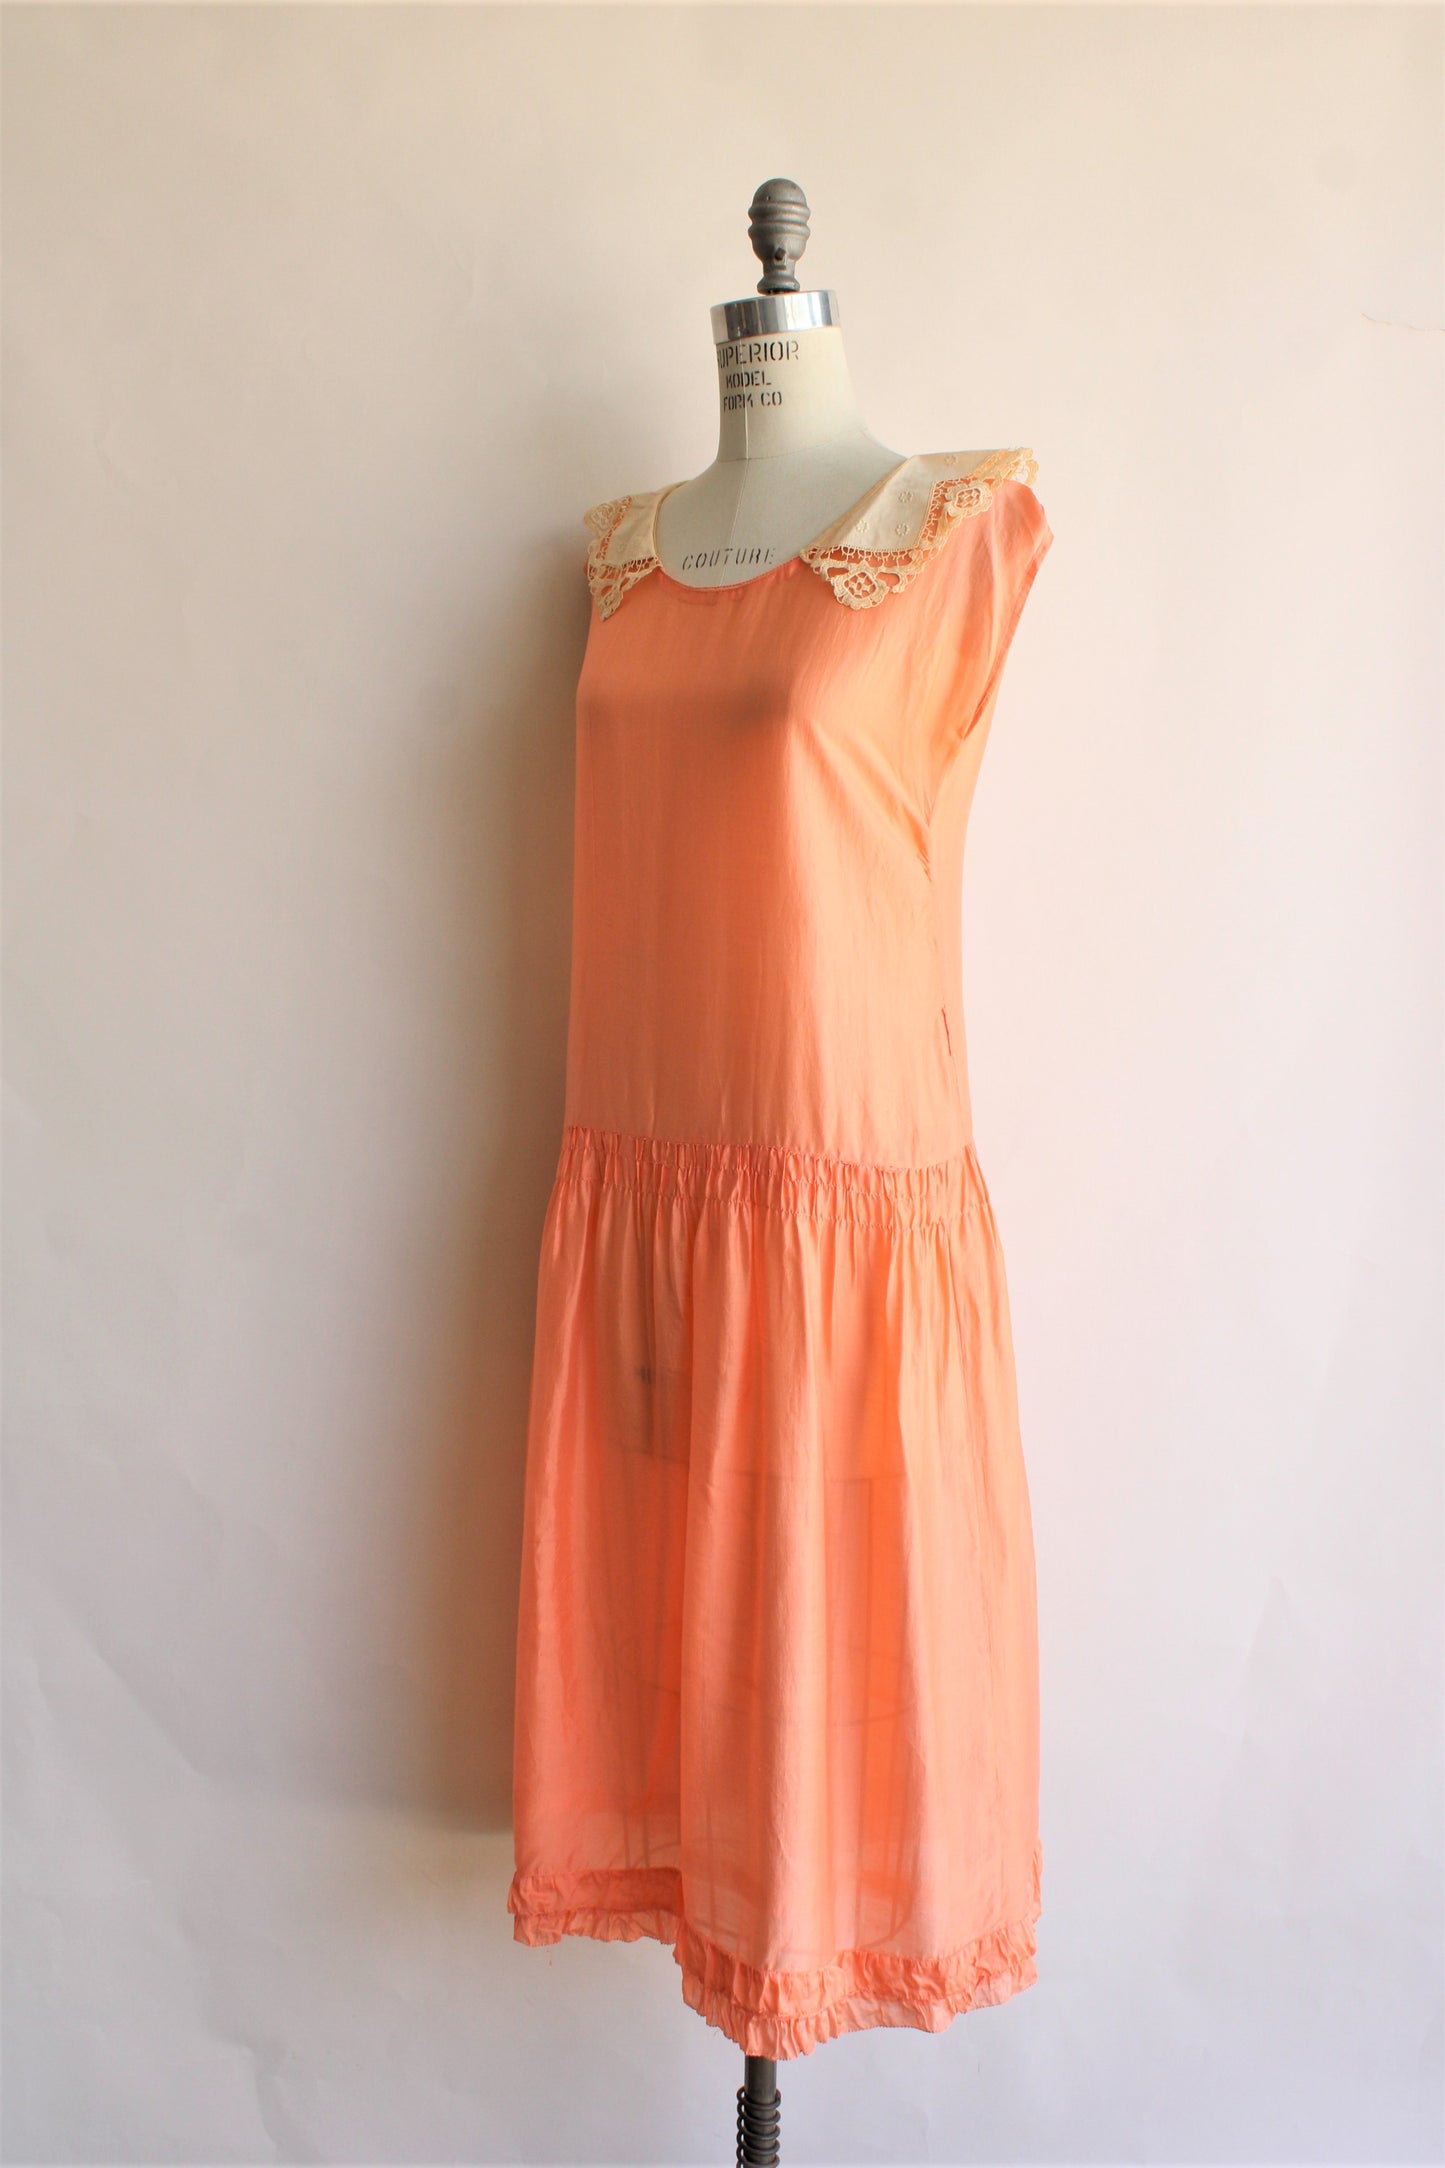 Antique 1920s Peach Silk Dress with Ivory Lace Collar